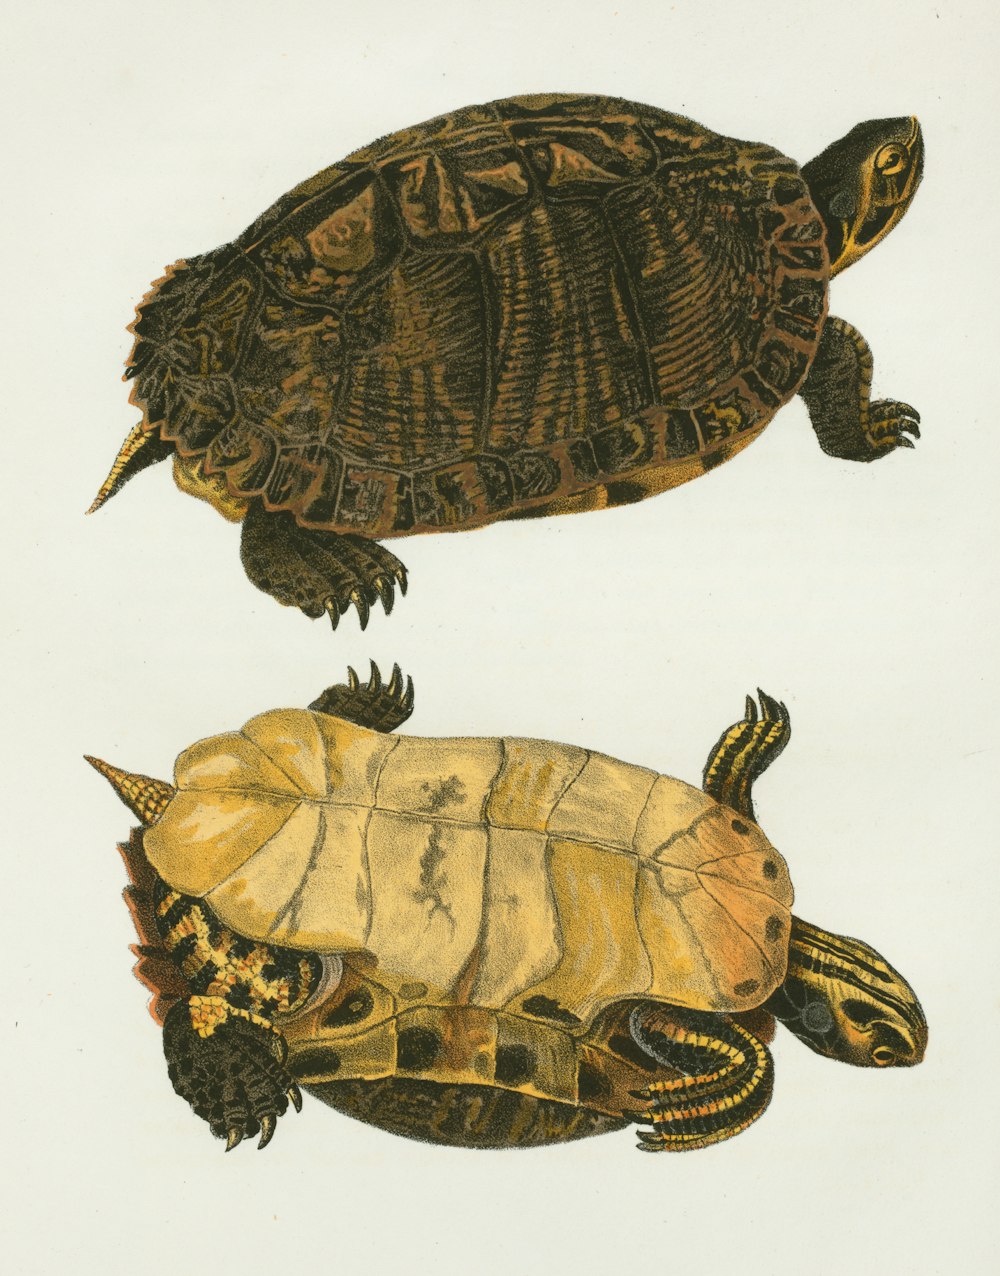 a drawing of two turtles on a white background